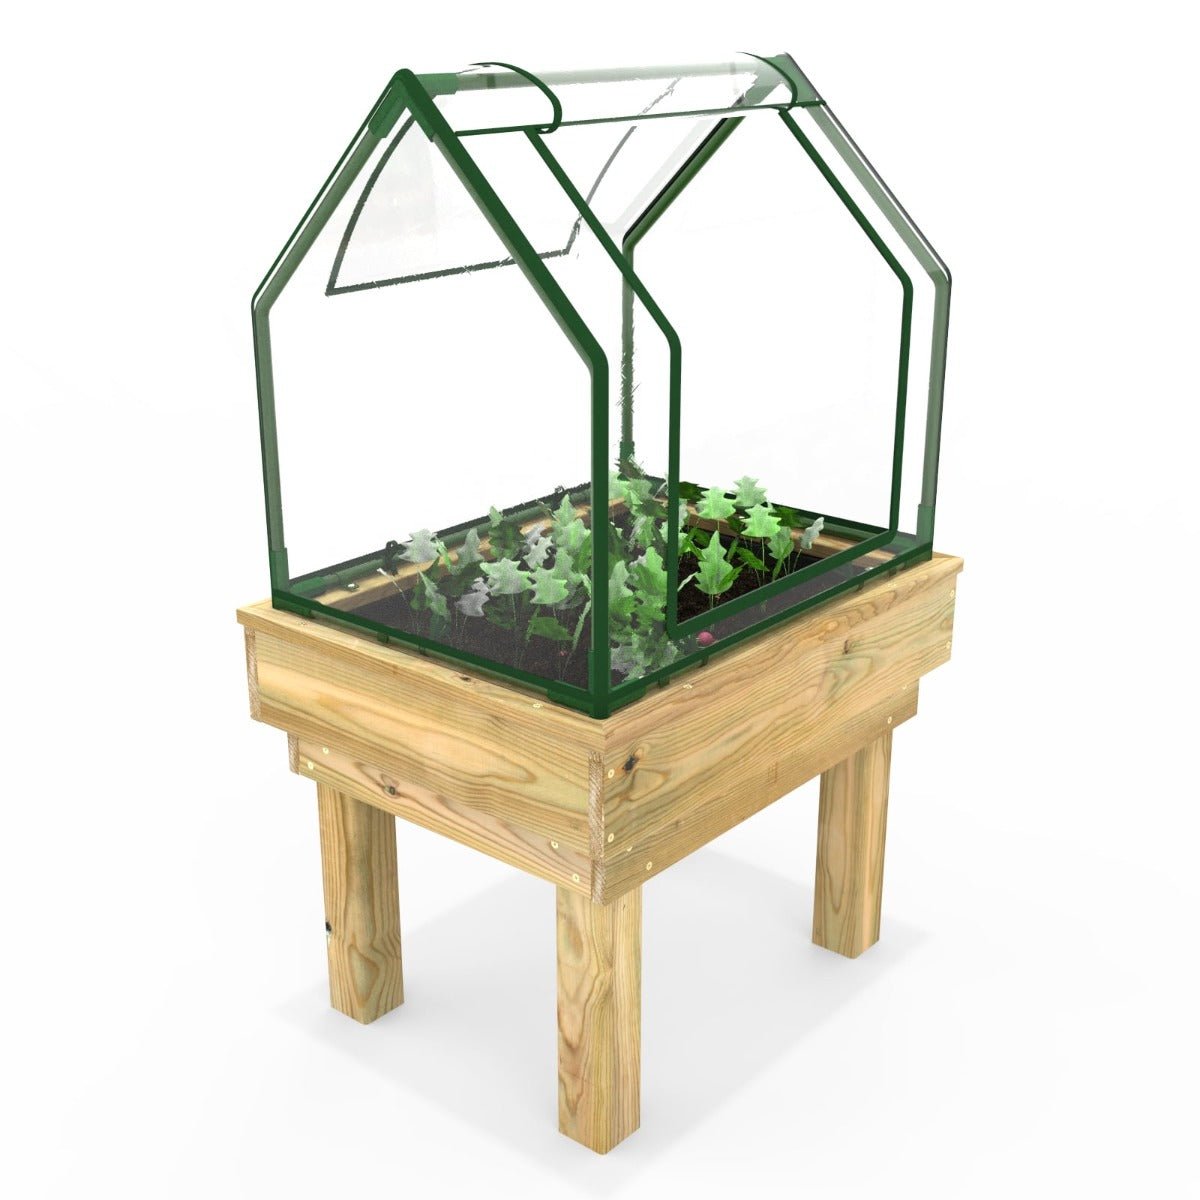 Rebo Wooden Learn and Grow Single Planter with Greenhouse